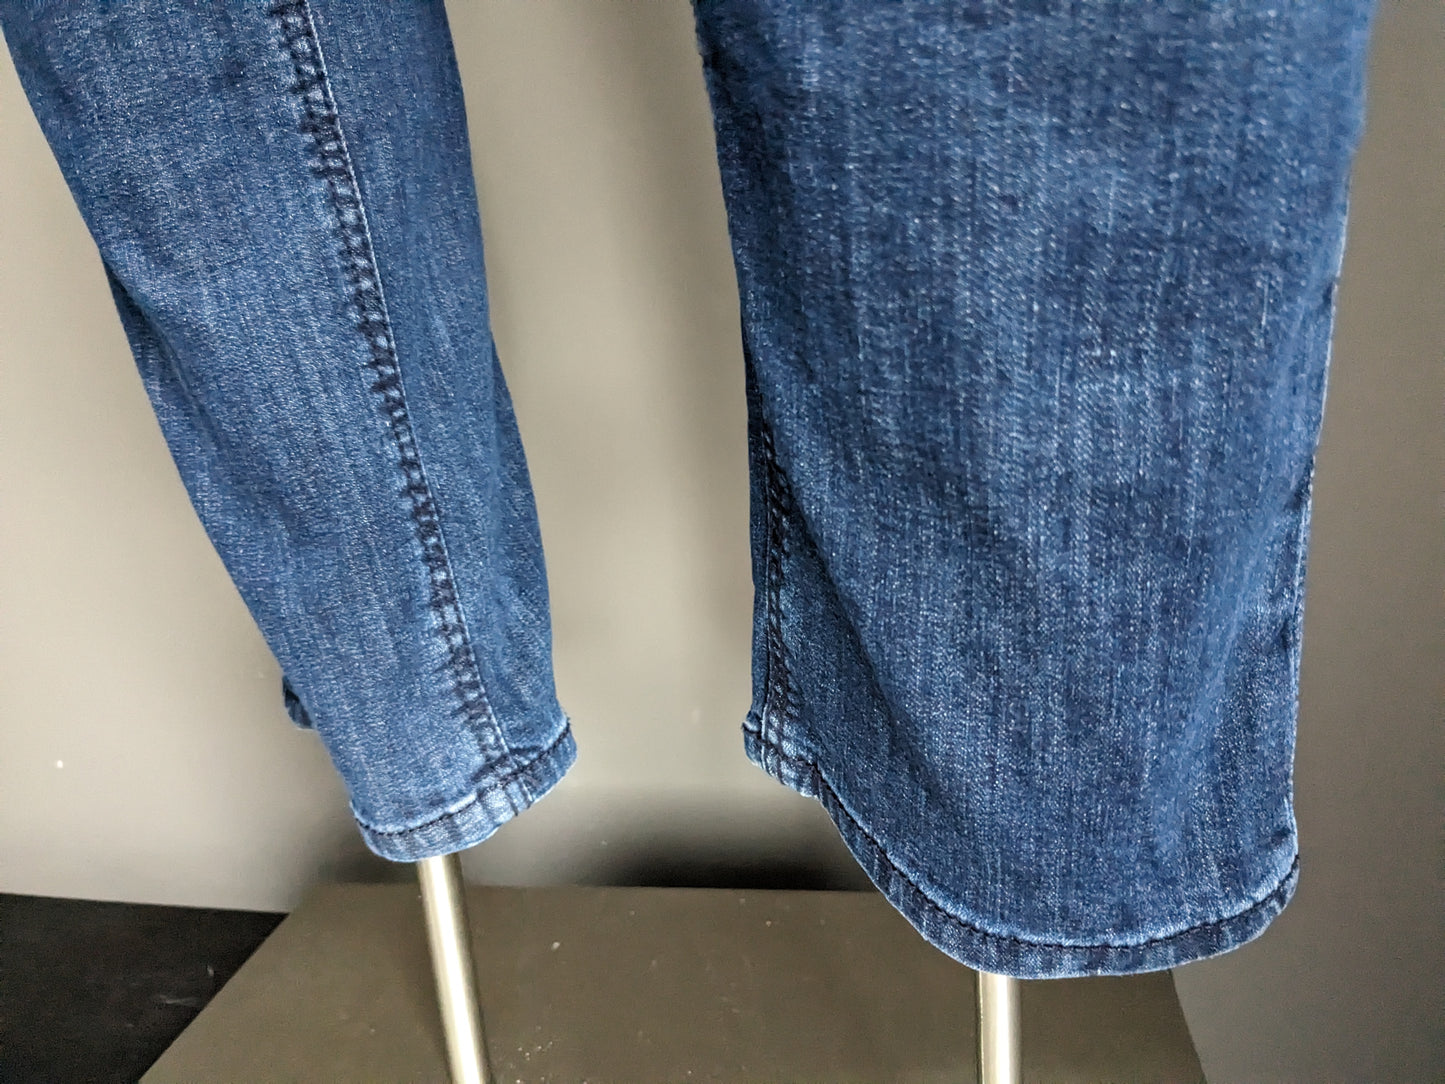 C&A jeans. Donker blauw. W29 - L32. Straight fit stretch.